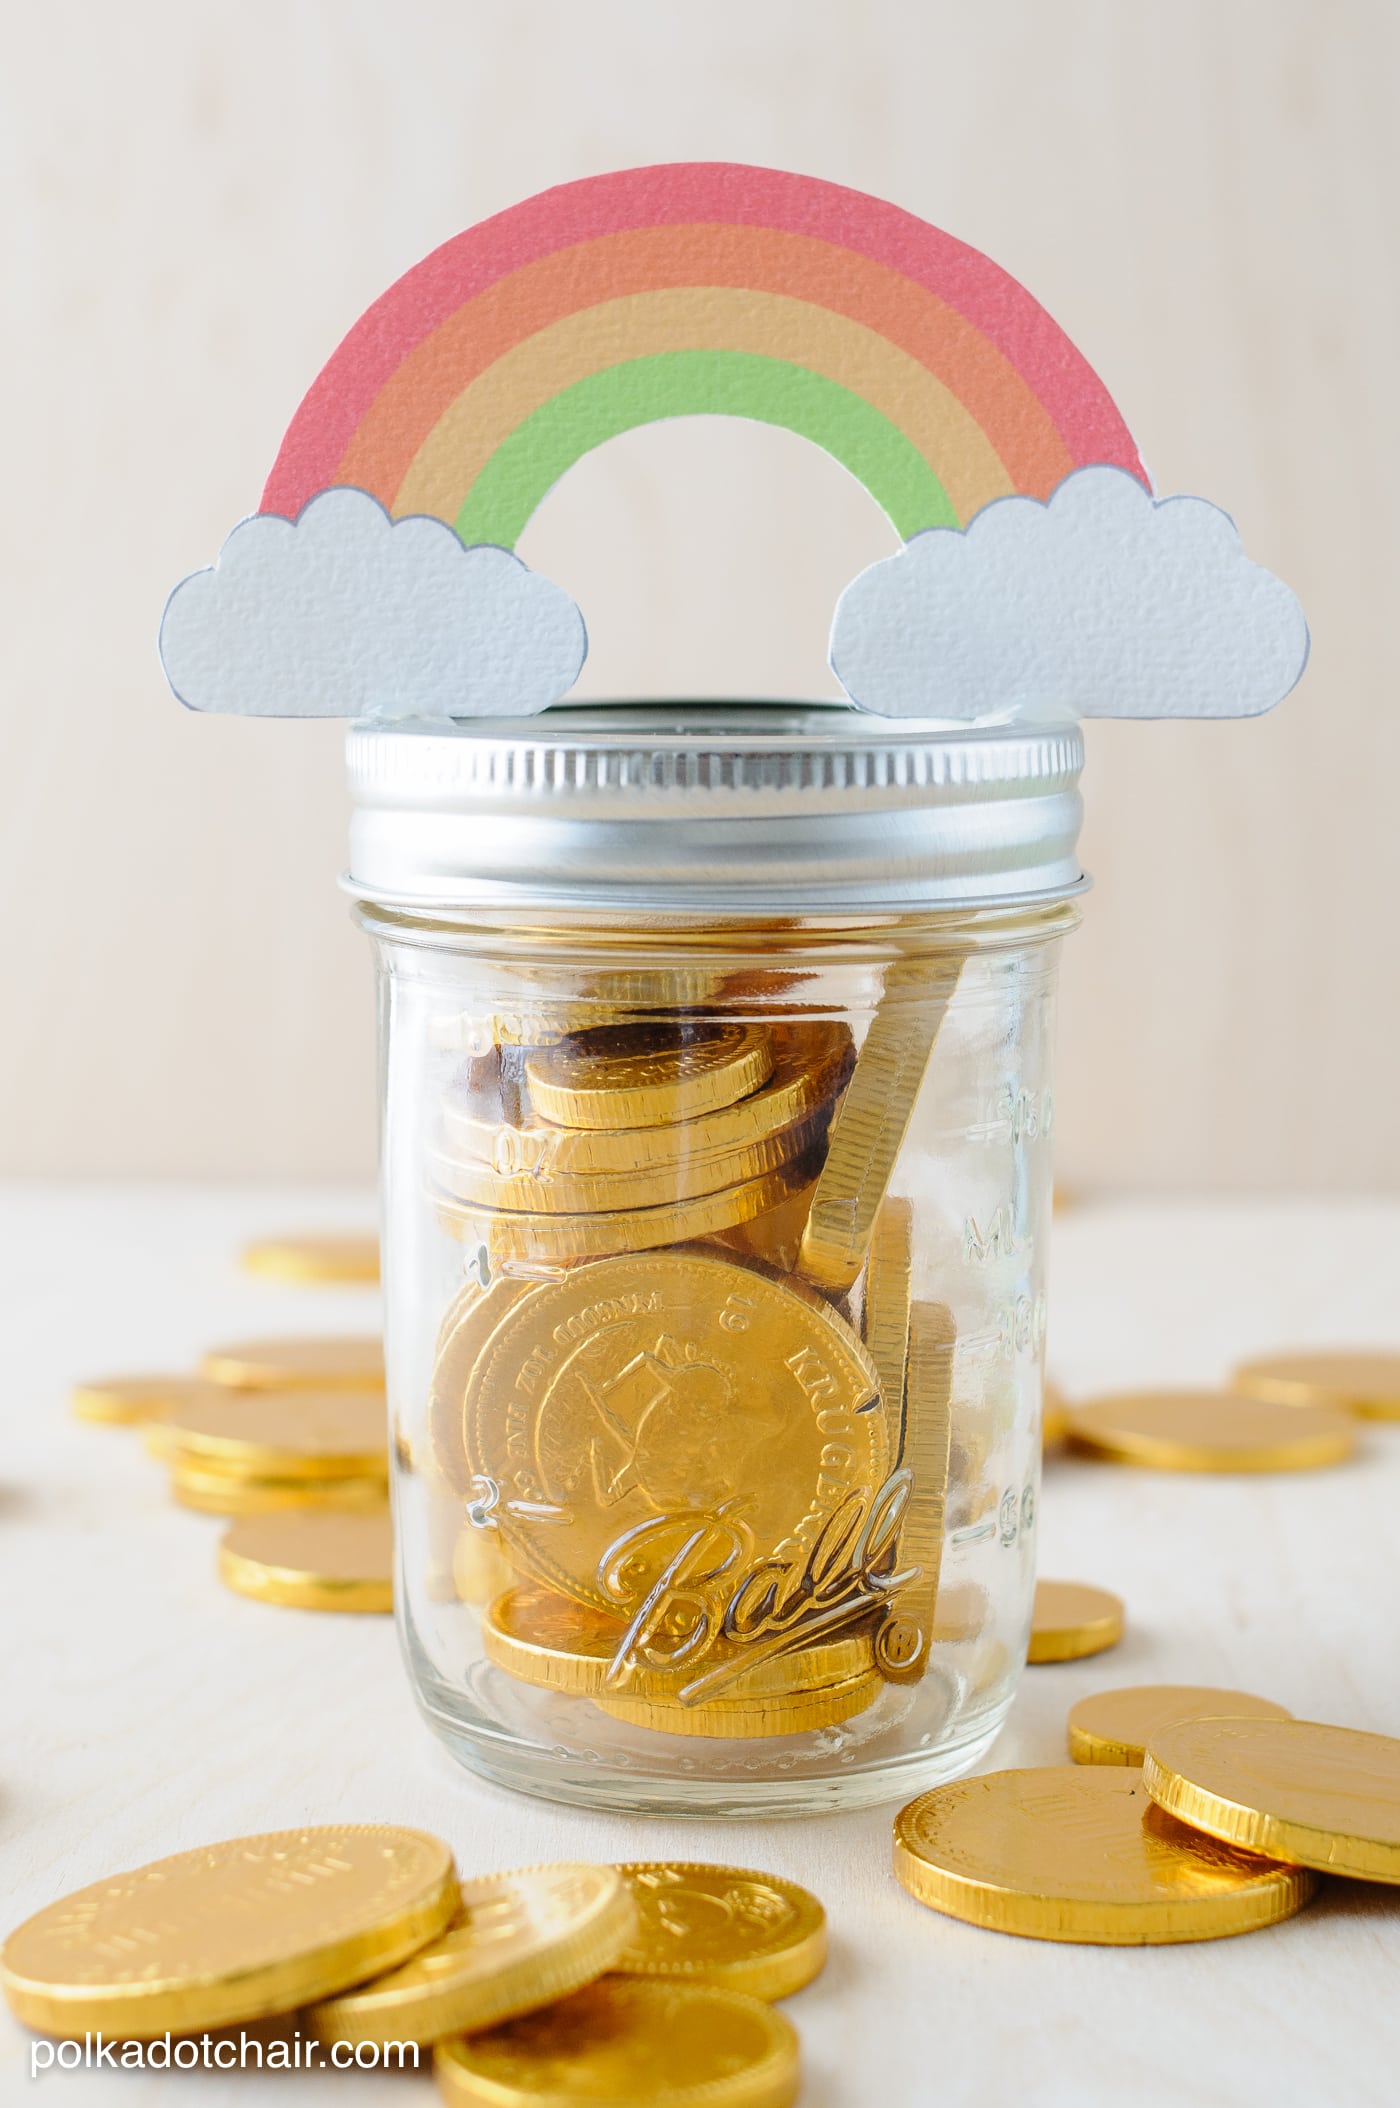 Cute St. Patrick's Day Mason Jar gift ideas- "pot of gold" jars with free printable tags.